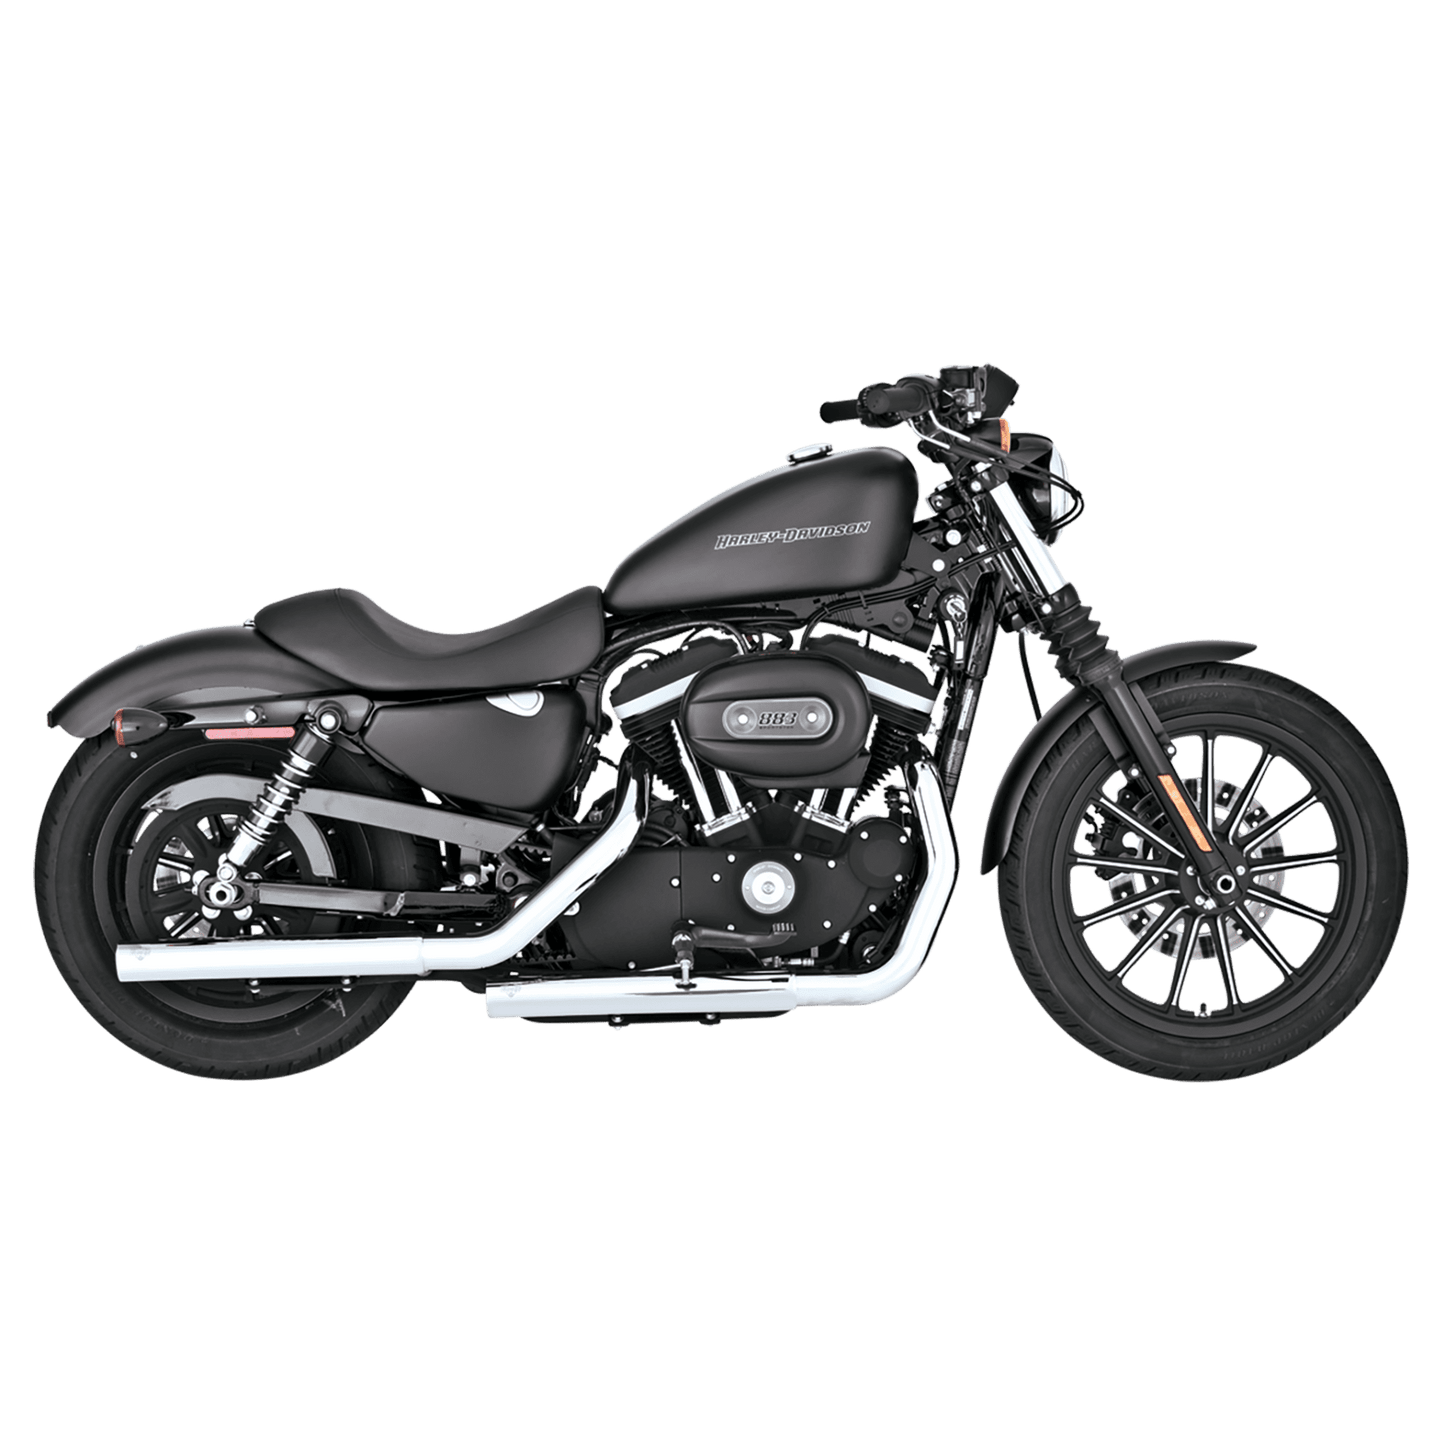 Mofles Vance & Hines Straightshots cromo H-D Sportster 2004 a 2013